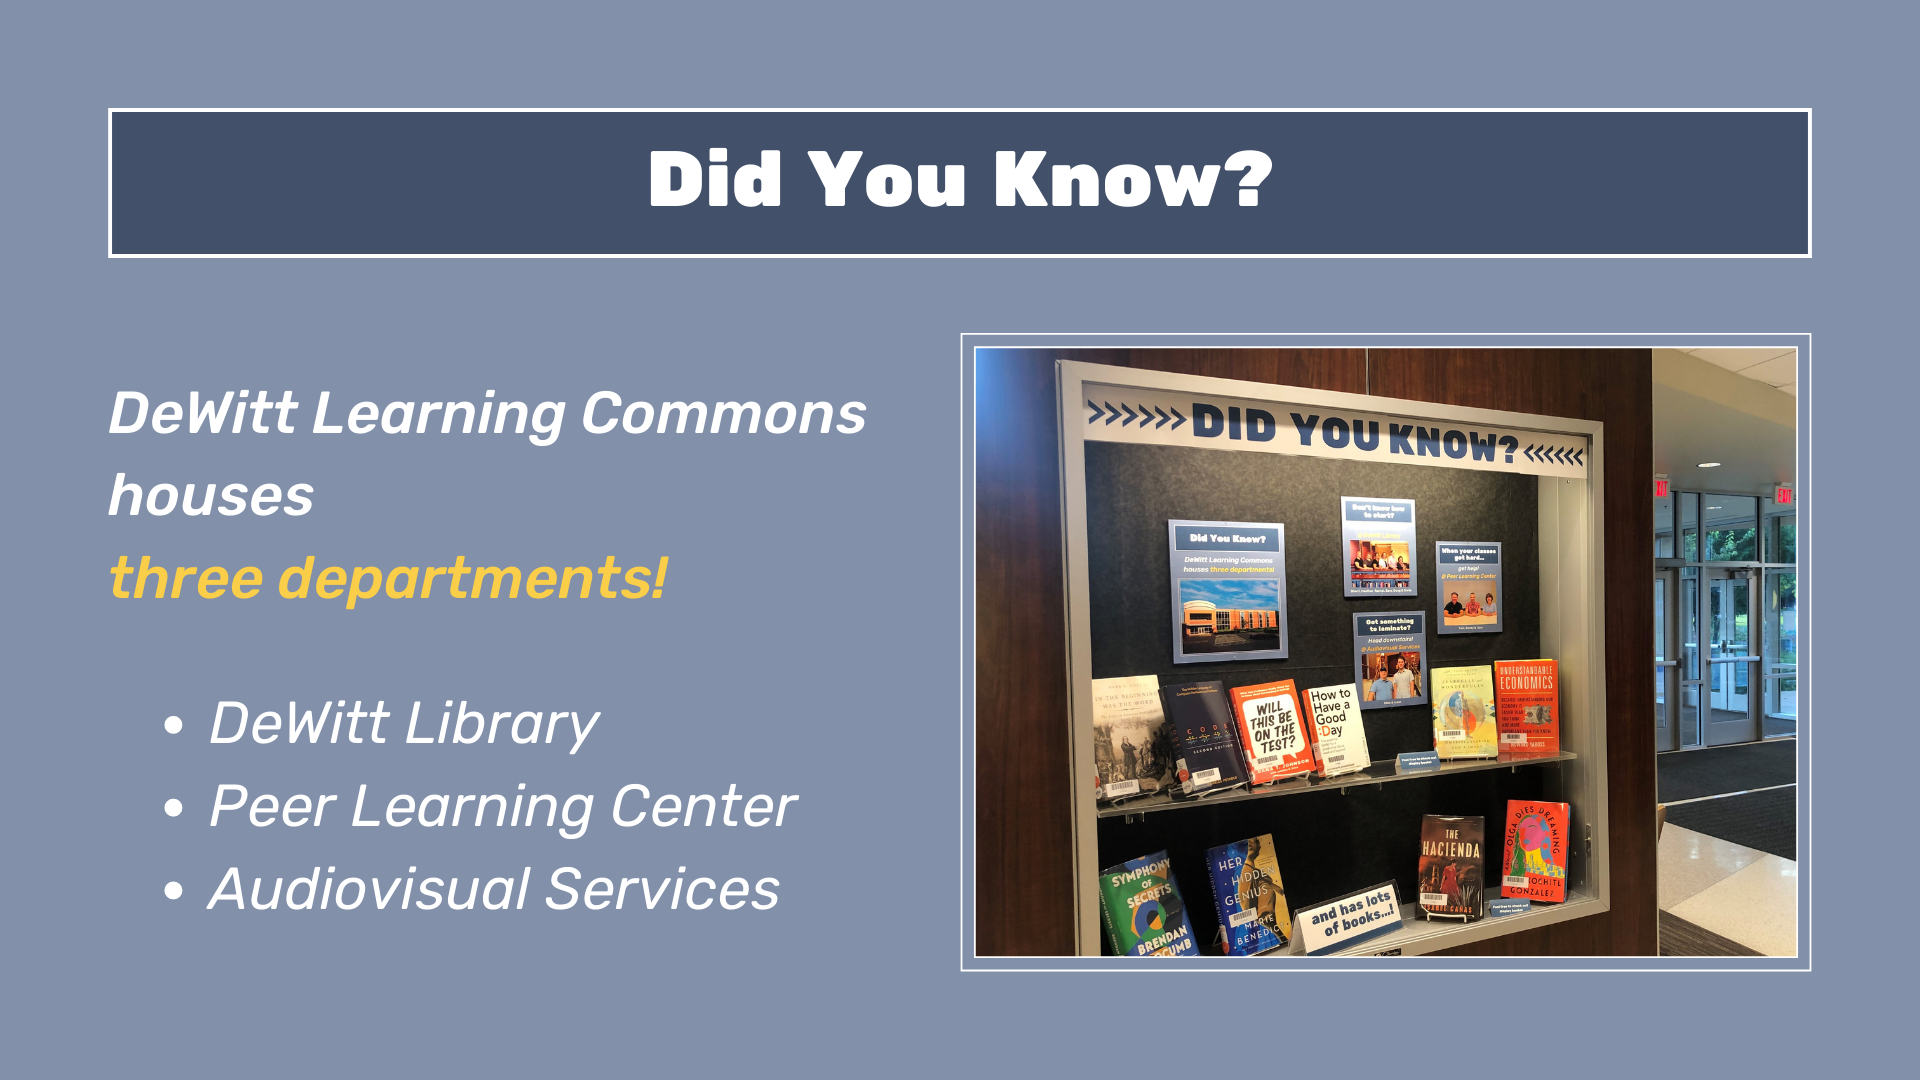 Did you know DeWitt Learning Commons houses three departments? DeWitt Library, Peer Learning Center, Audiovisual Services